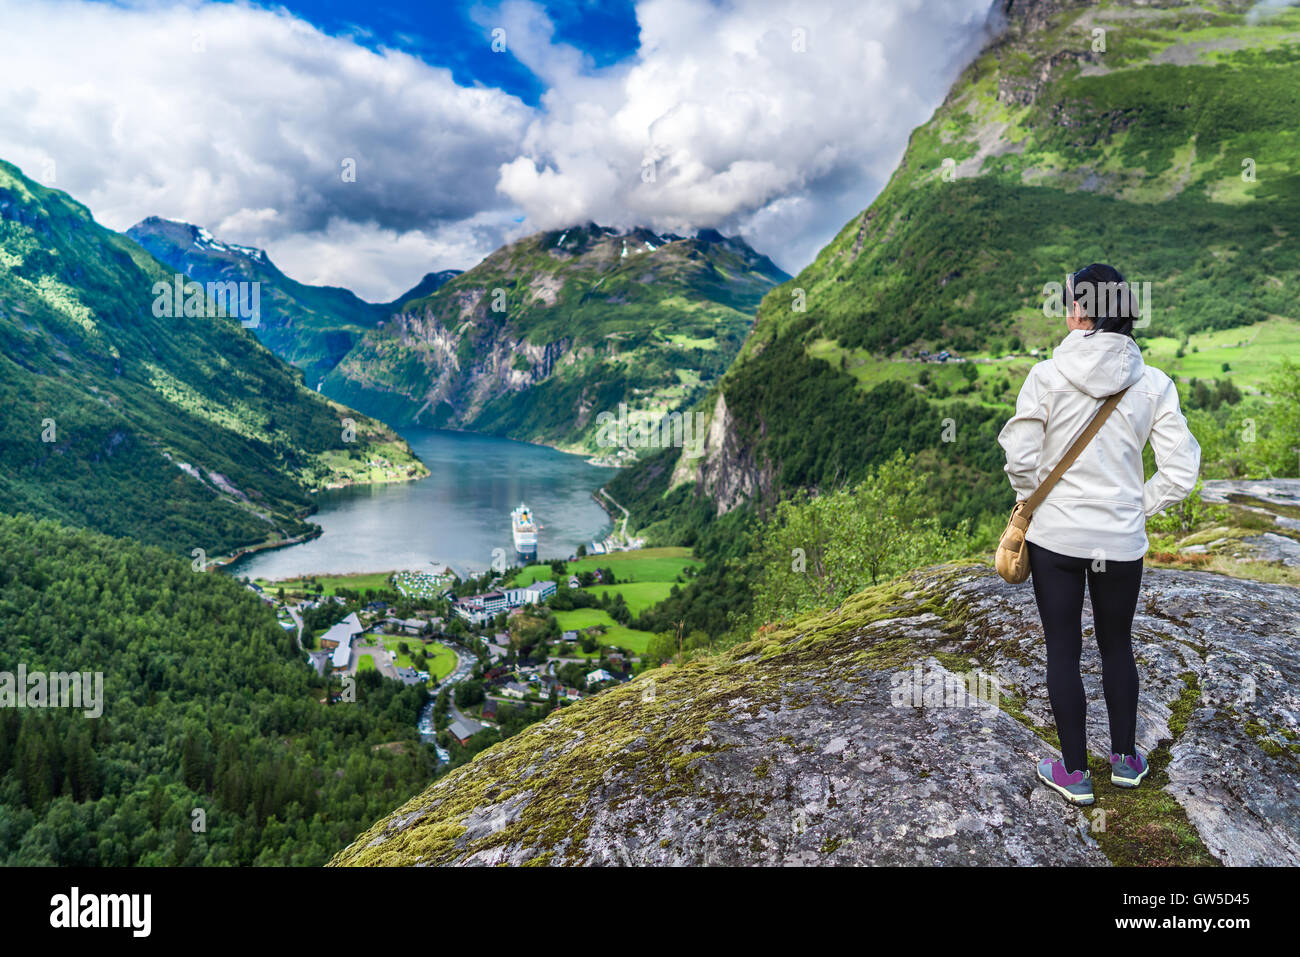 Geiranger fjord, Beautiful Nature Norway panorama. It is a 15-kilometre (9.3 mi) long branch off of the Sunnylvsfjorden, which i Stock Photo